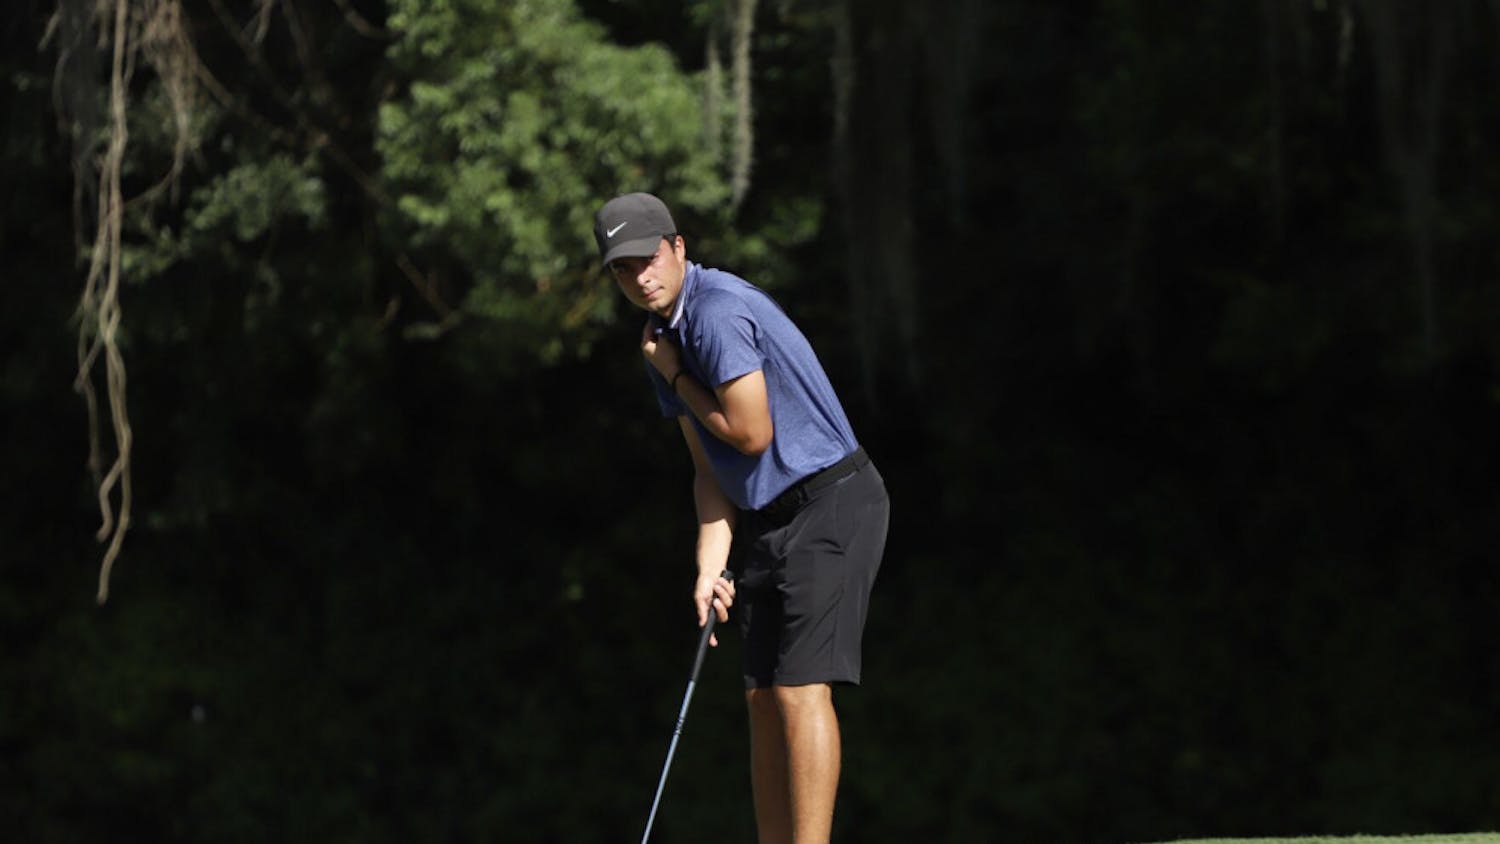 Fred Biondi tied for first at the Calusa Cup Tuesday with a 5-under-par 211. The victory is his second of the year after taking home the top spot at the Gators Invitational earlier this February. 